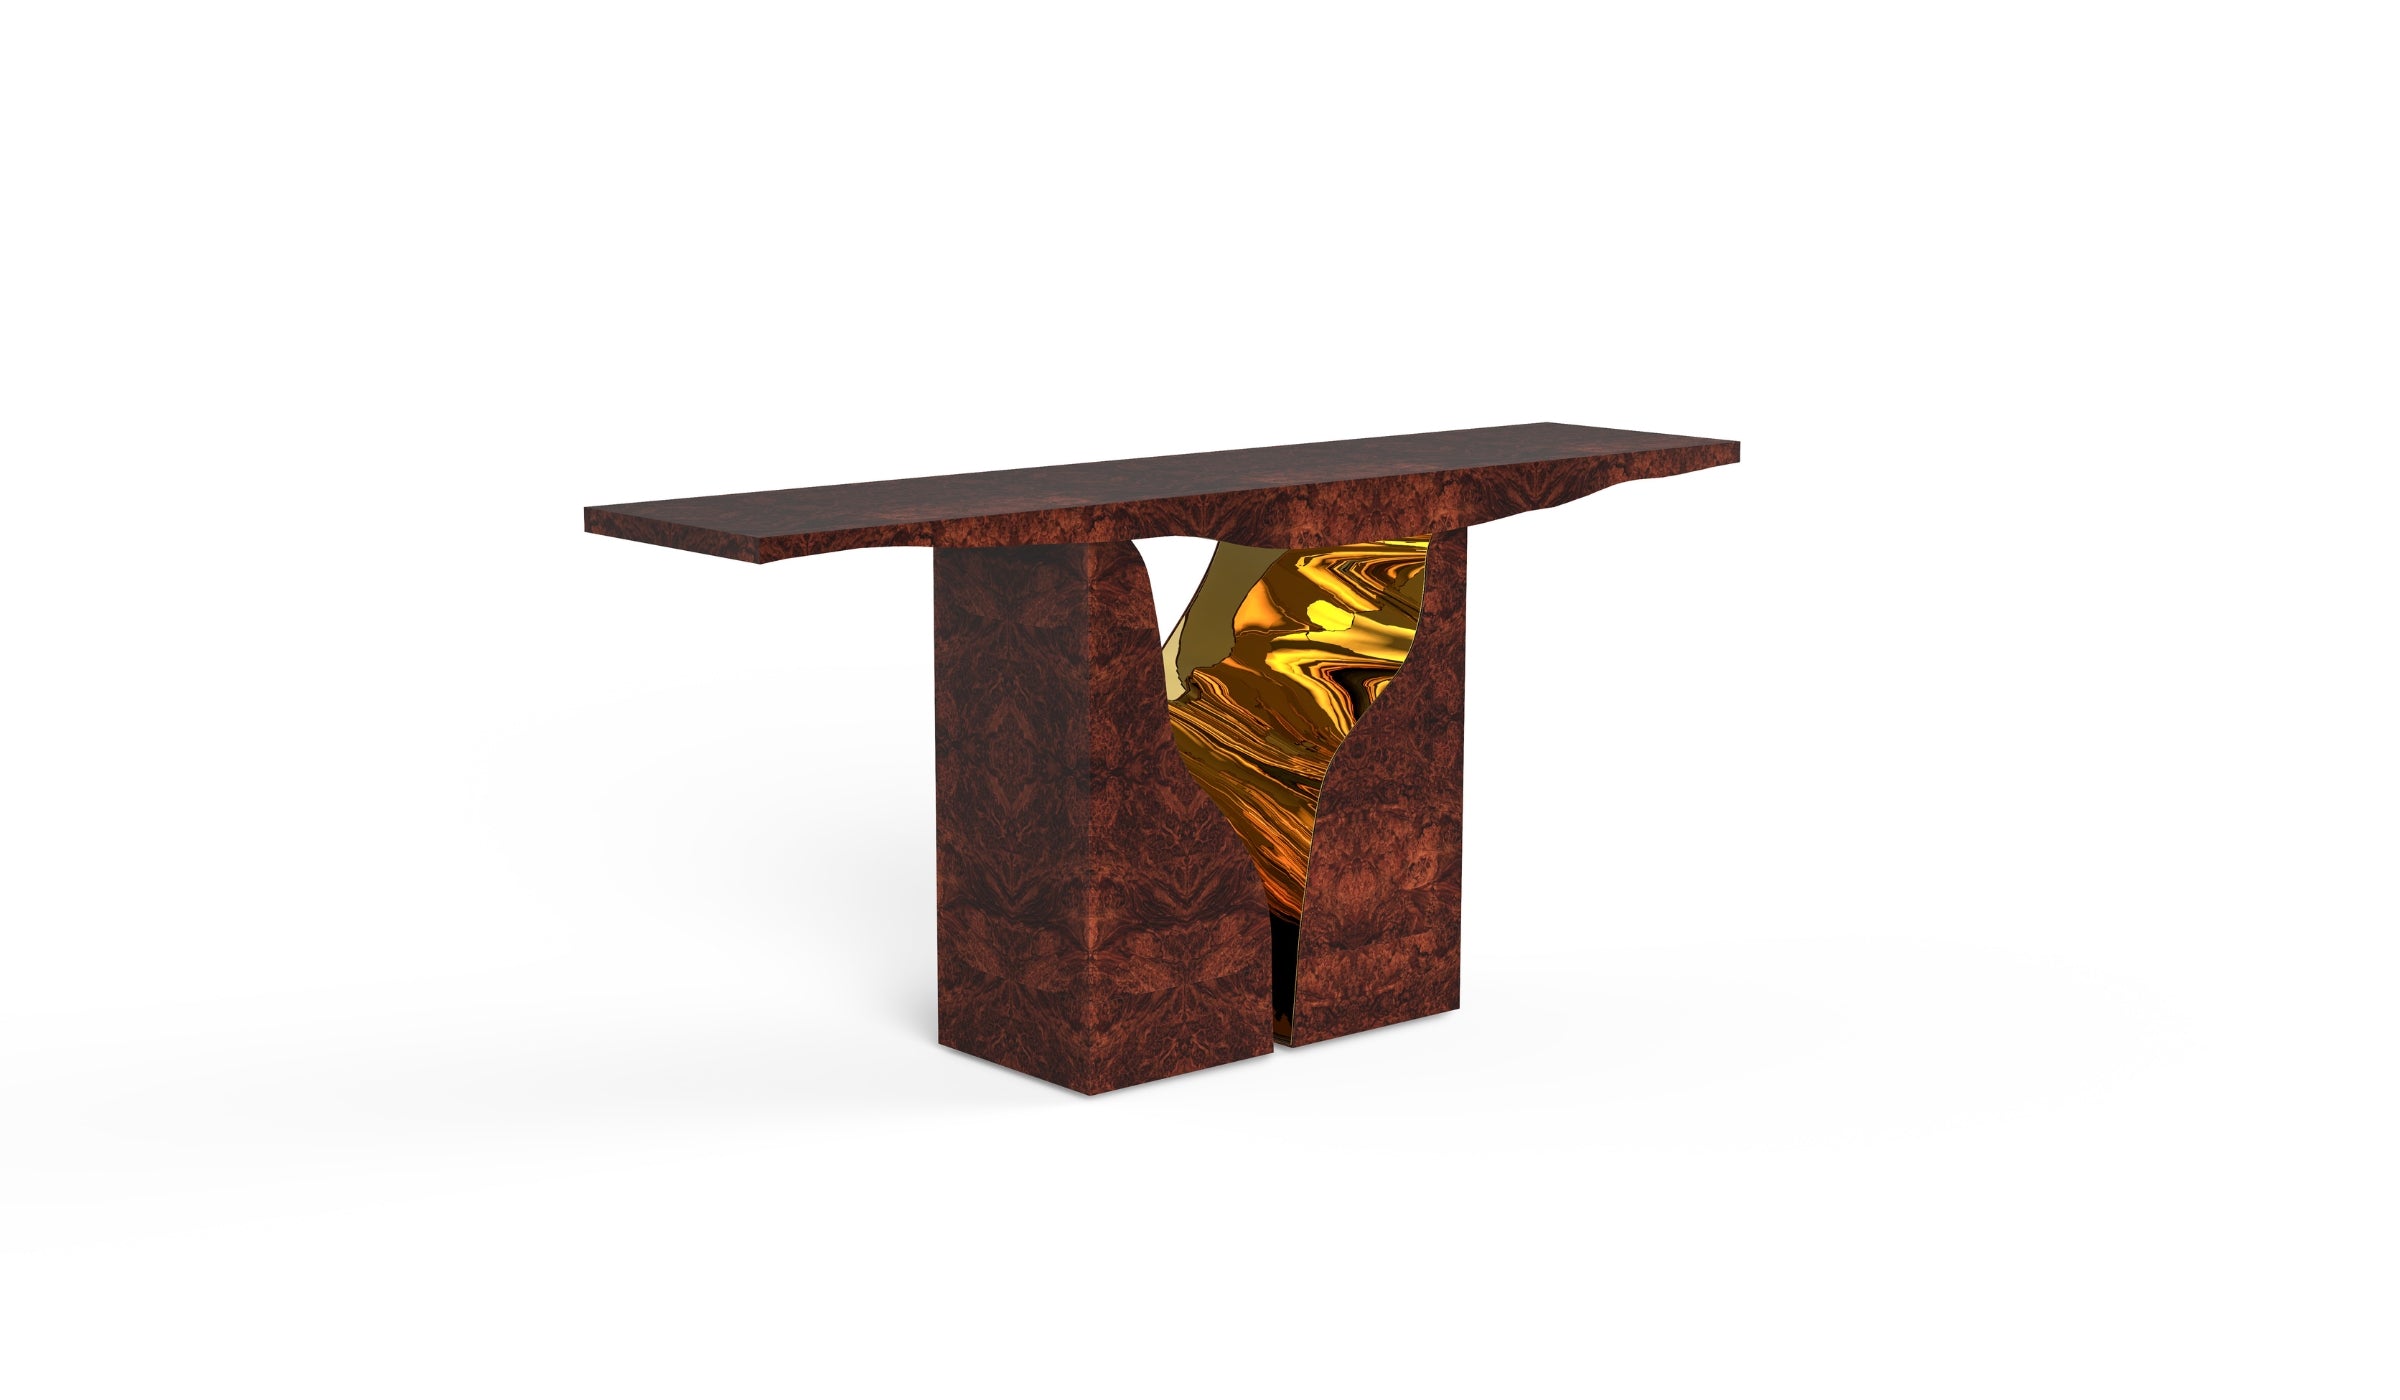 Lapiaz - Handcrafted console inspired by karst formations in walnut and brass